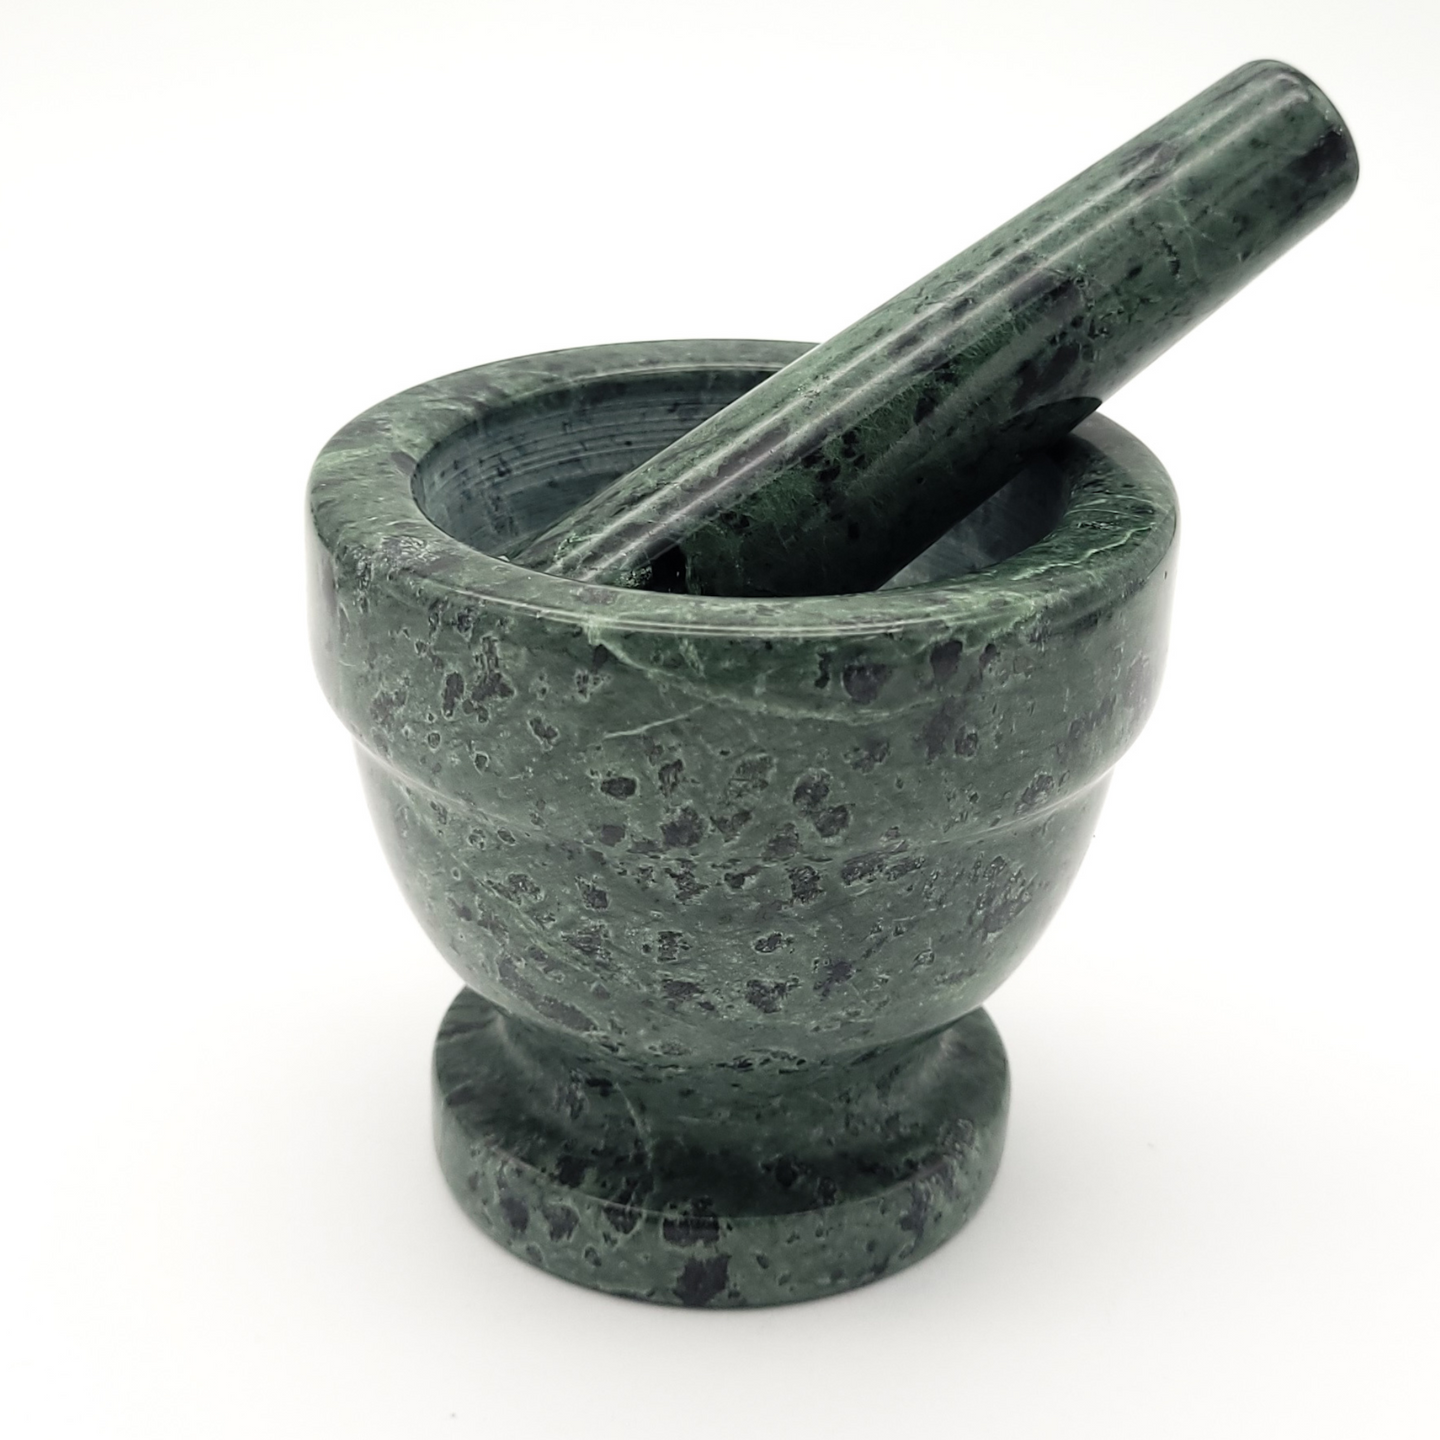 Small Green Marble Mortar and Pestle - 3.25 inch